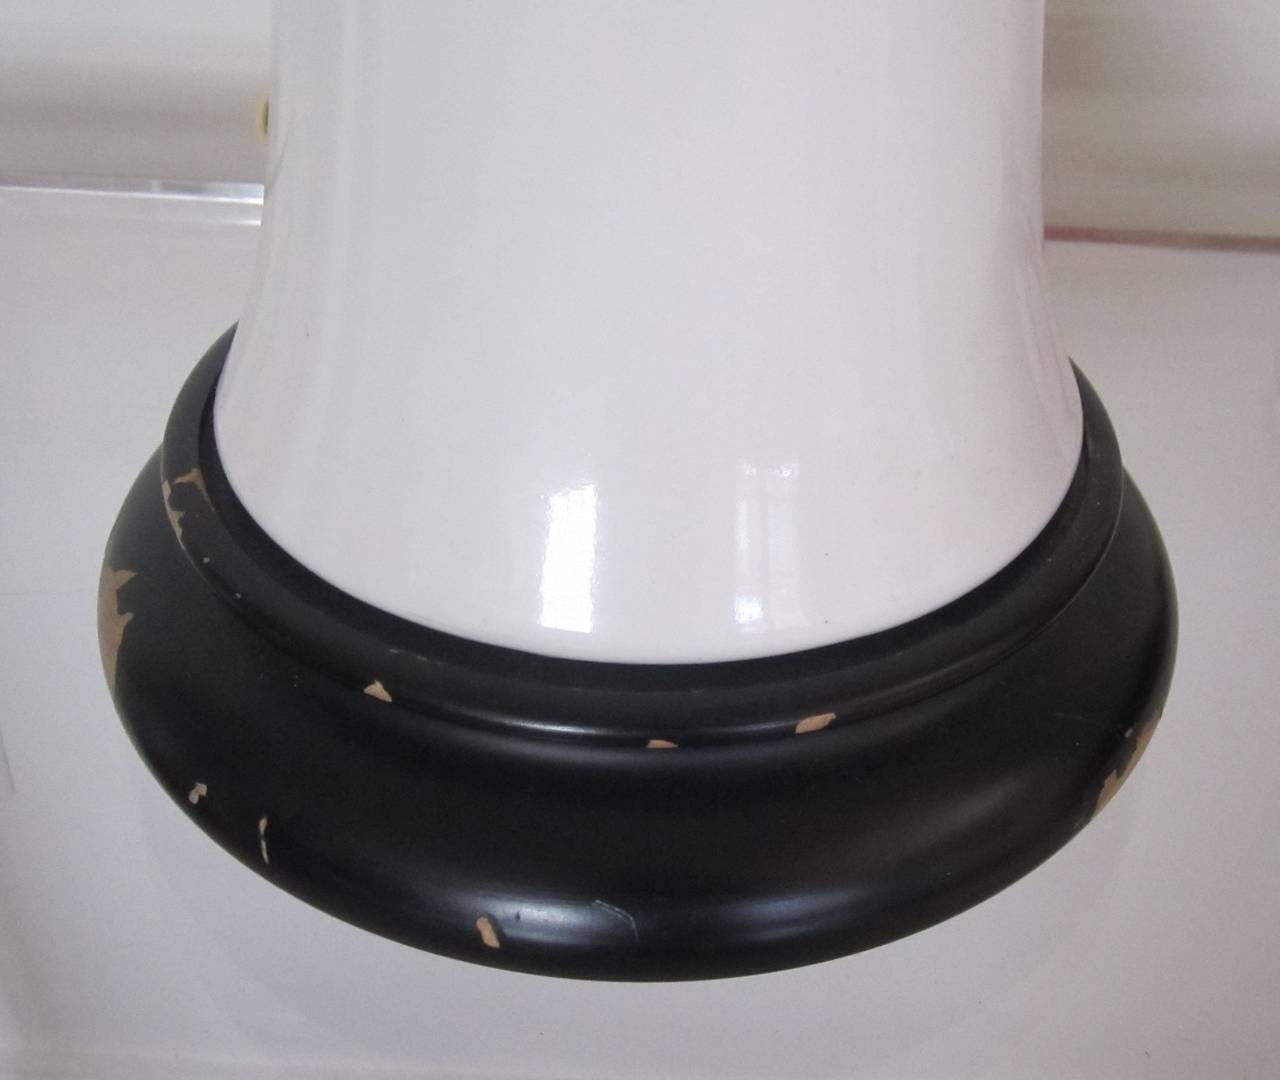 Ceramic Tall Black and White Blanc-de-Chine Table Lamps in the Style of James Mont